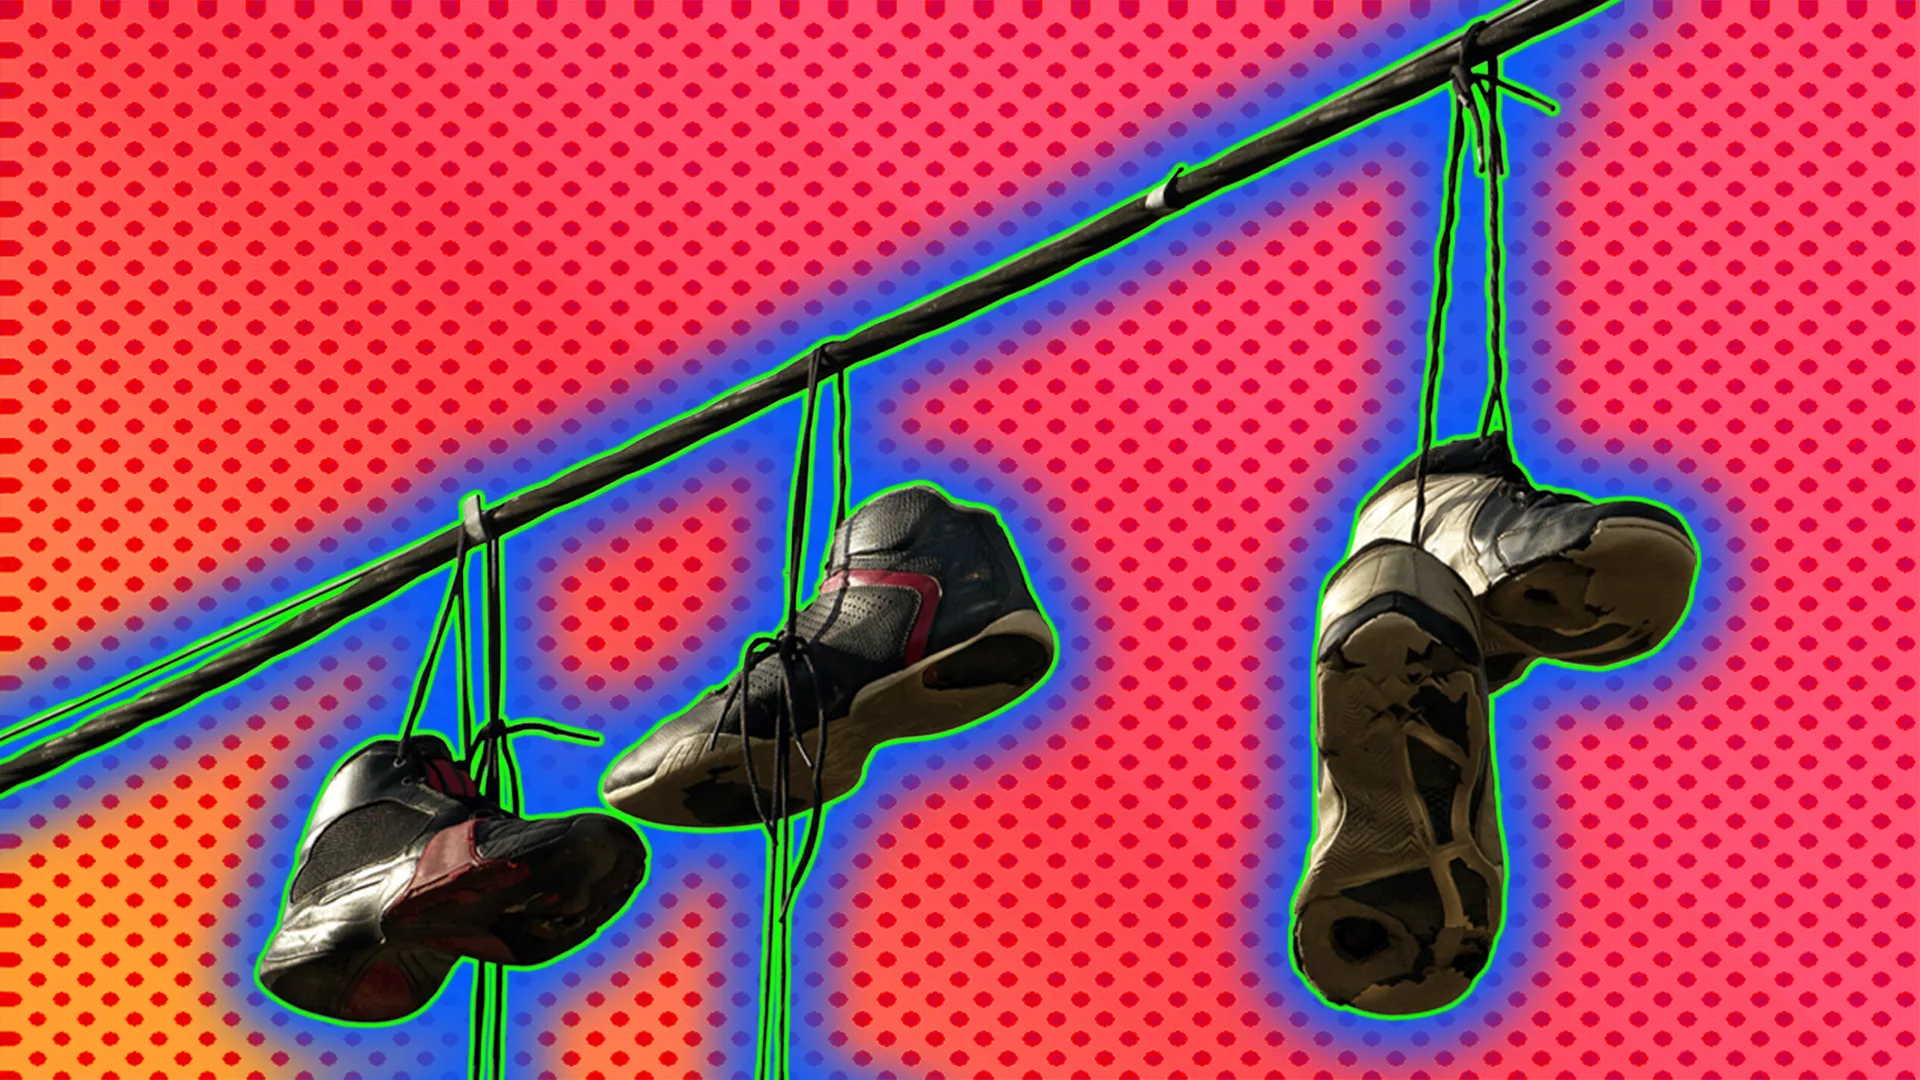 Sneakers hanging on a line - in graphic house style